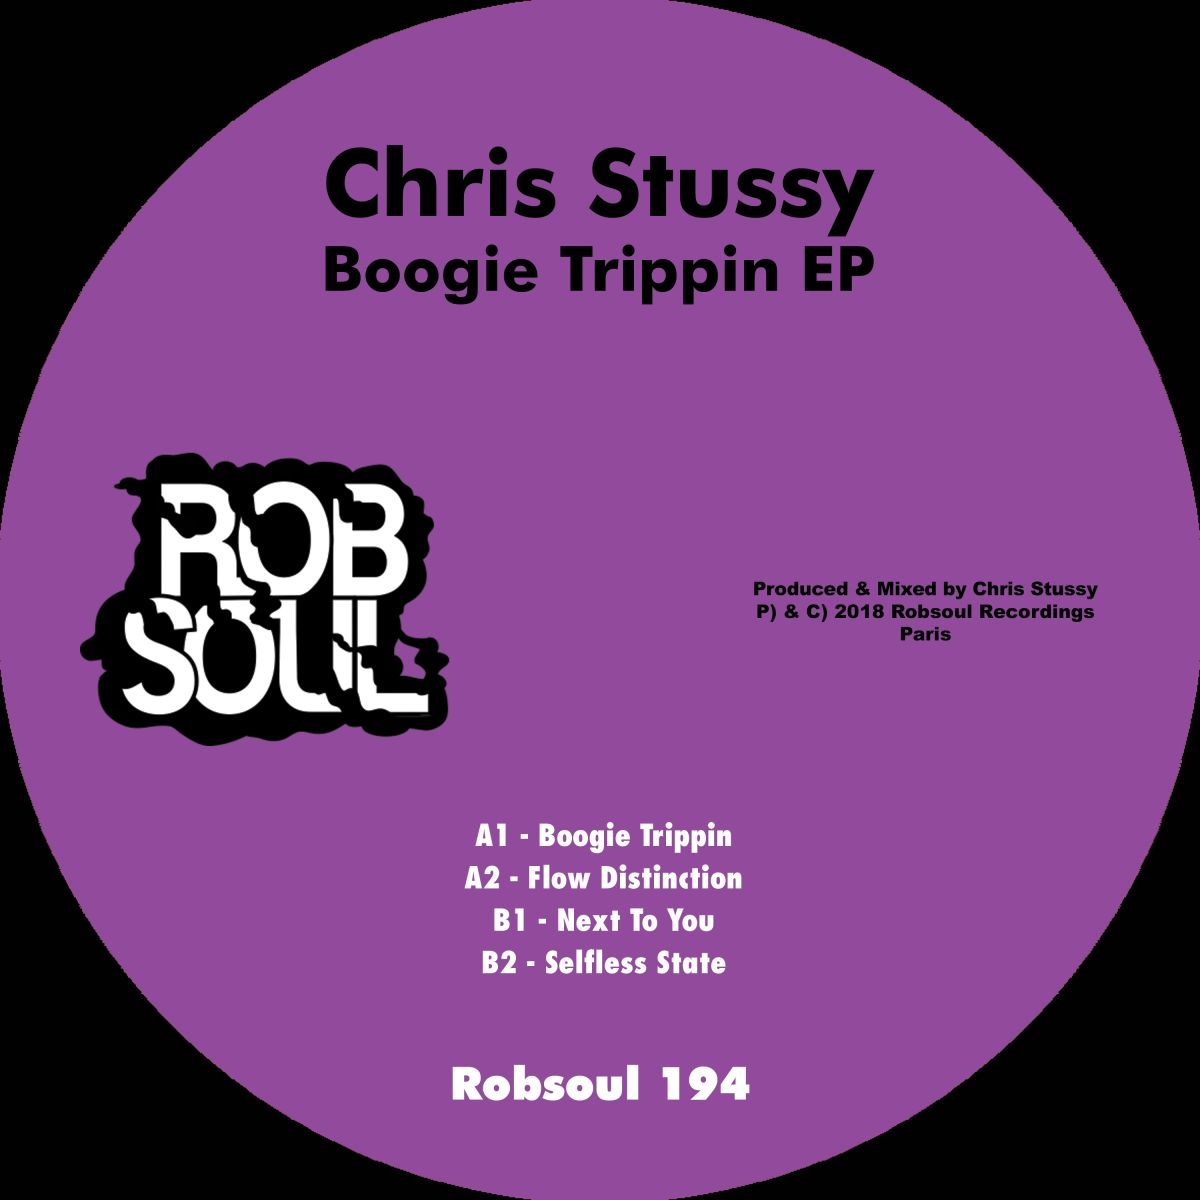 Chris Stussy - Boogie Trippin EP / Robsoul